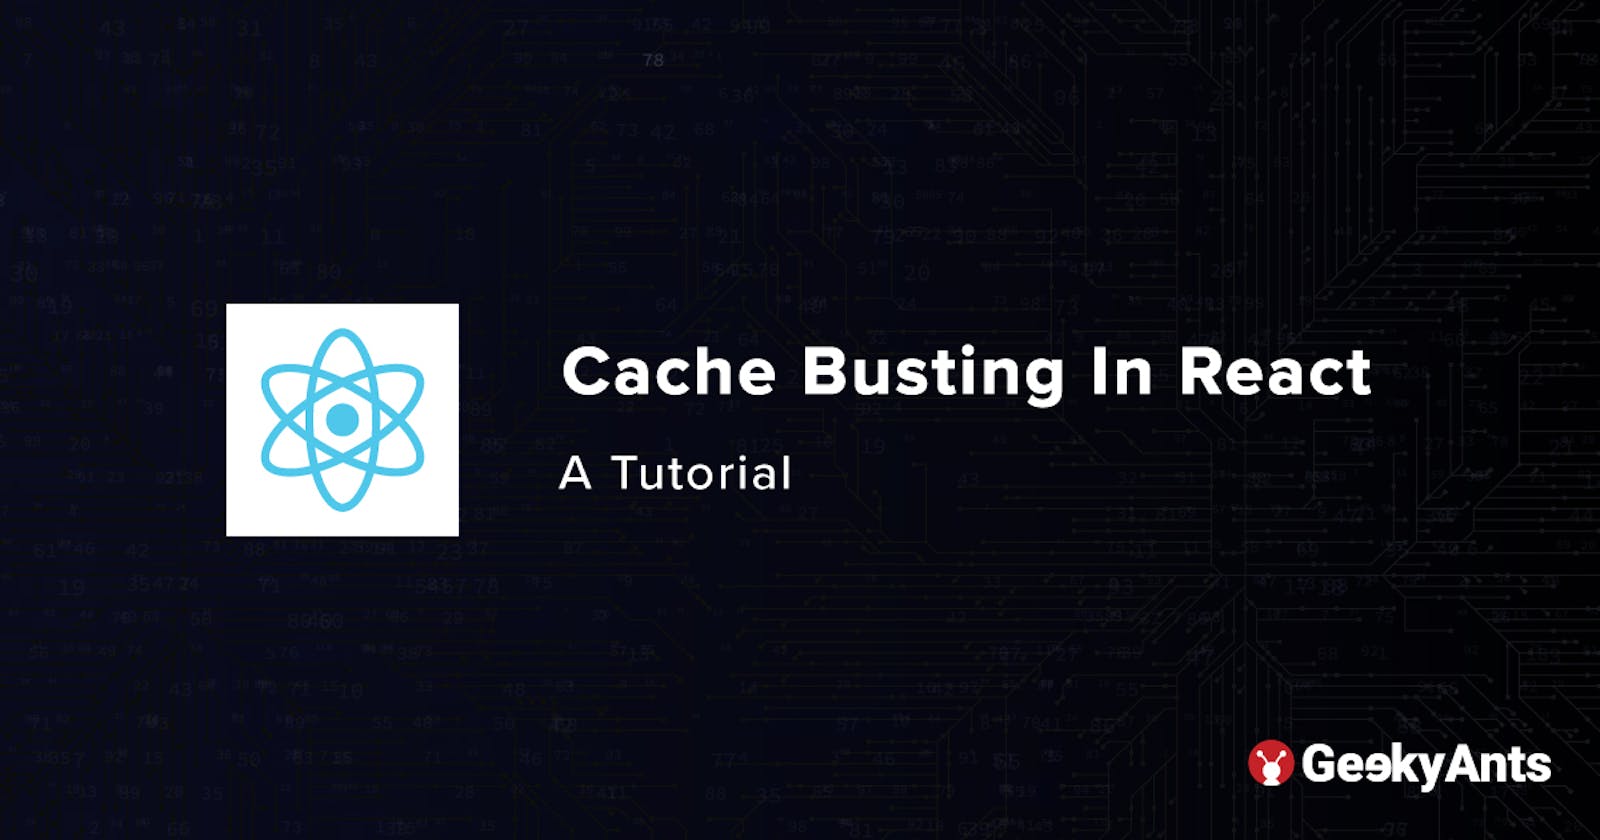 Cache Busting In React: A Tutorial